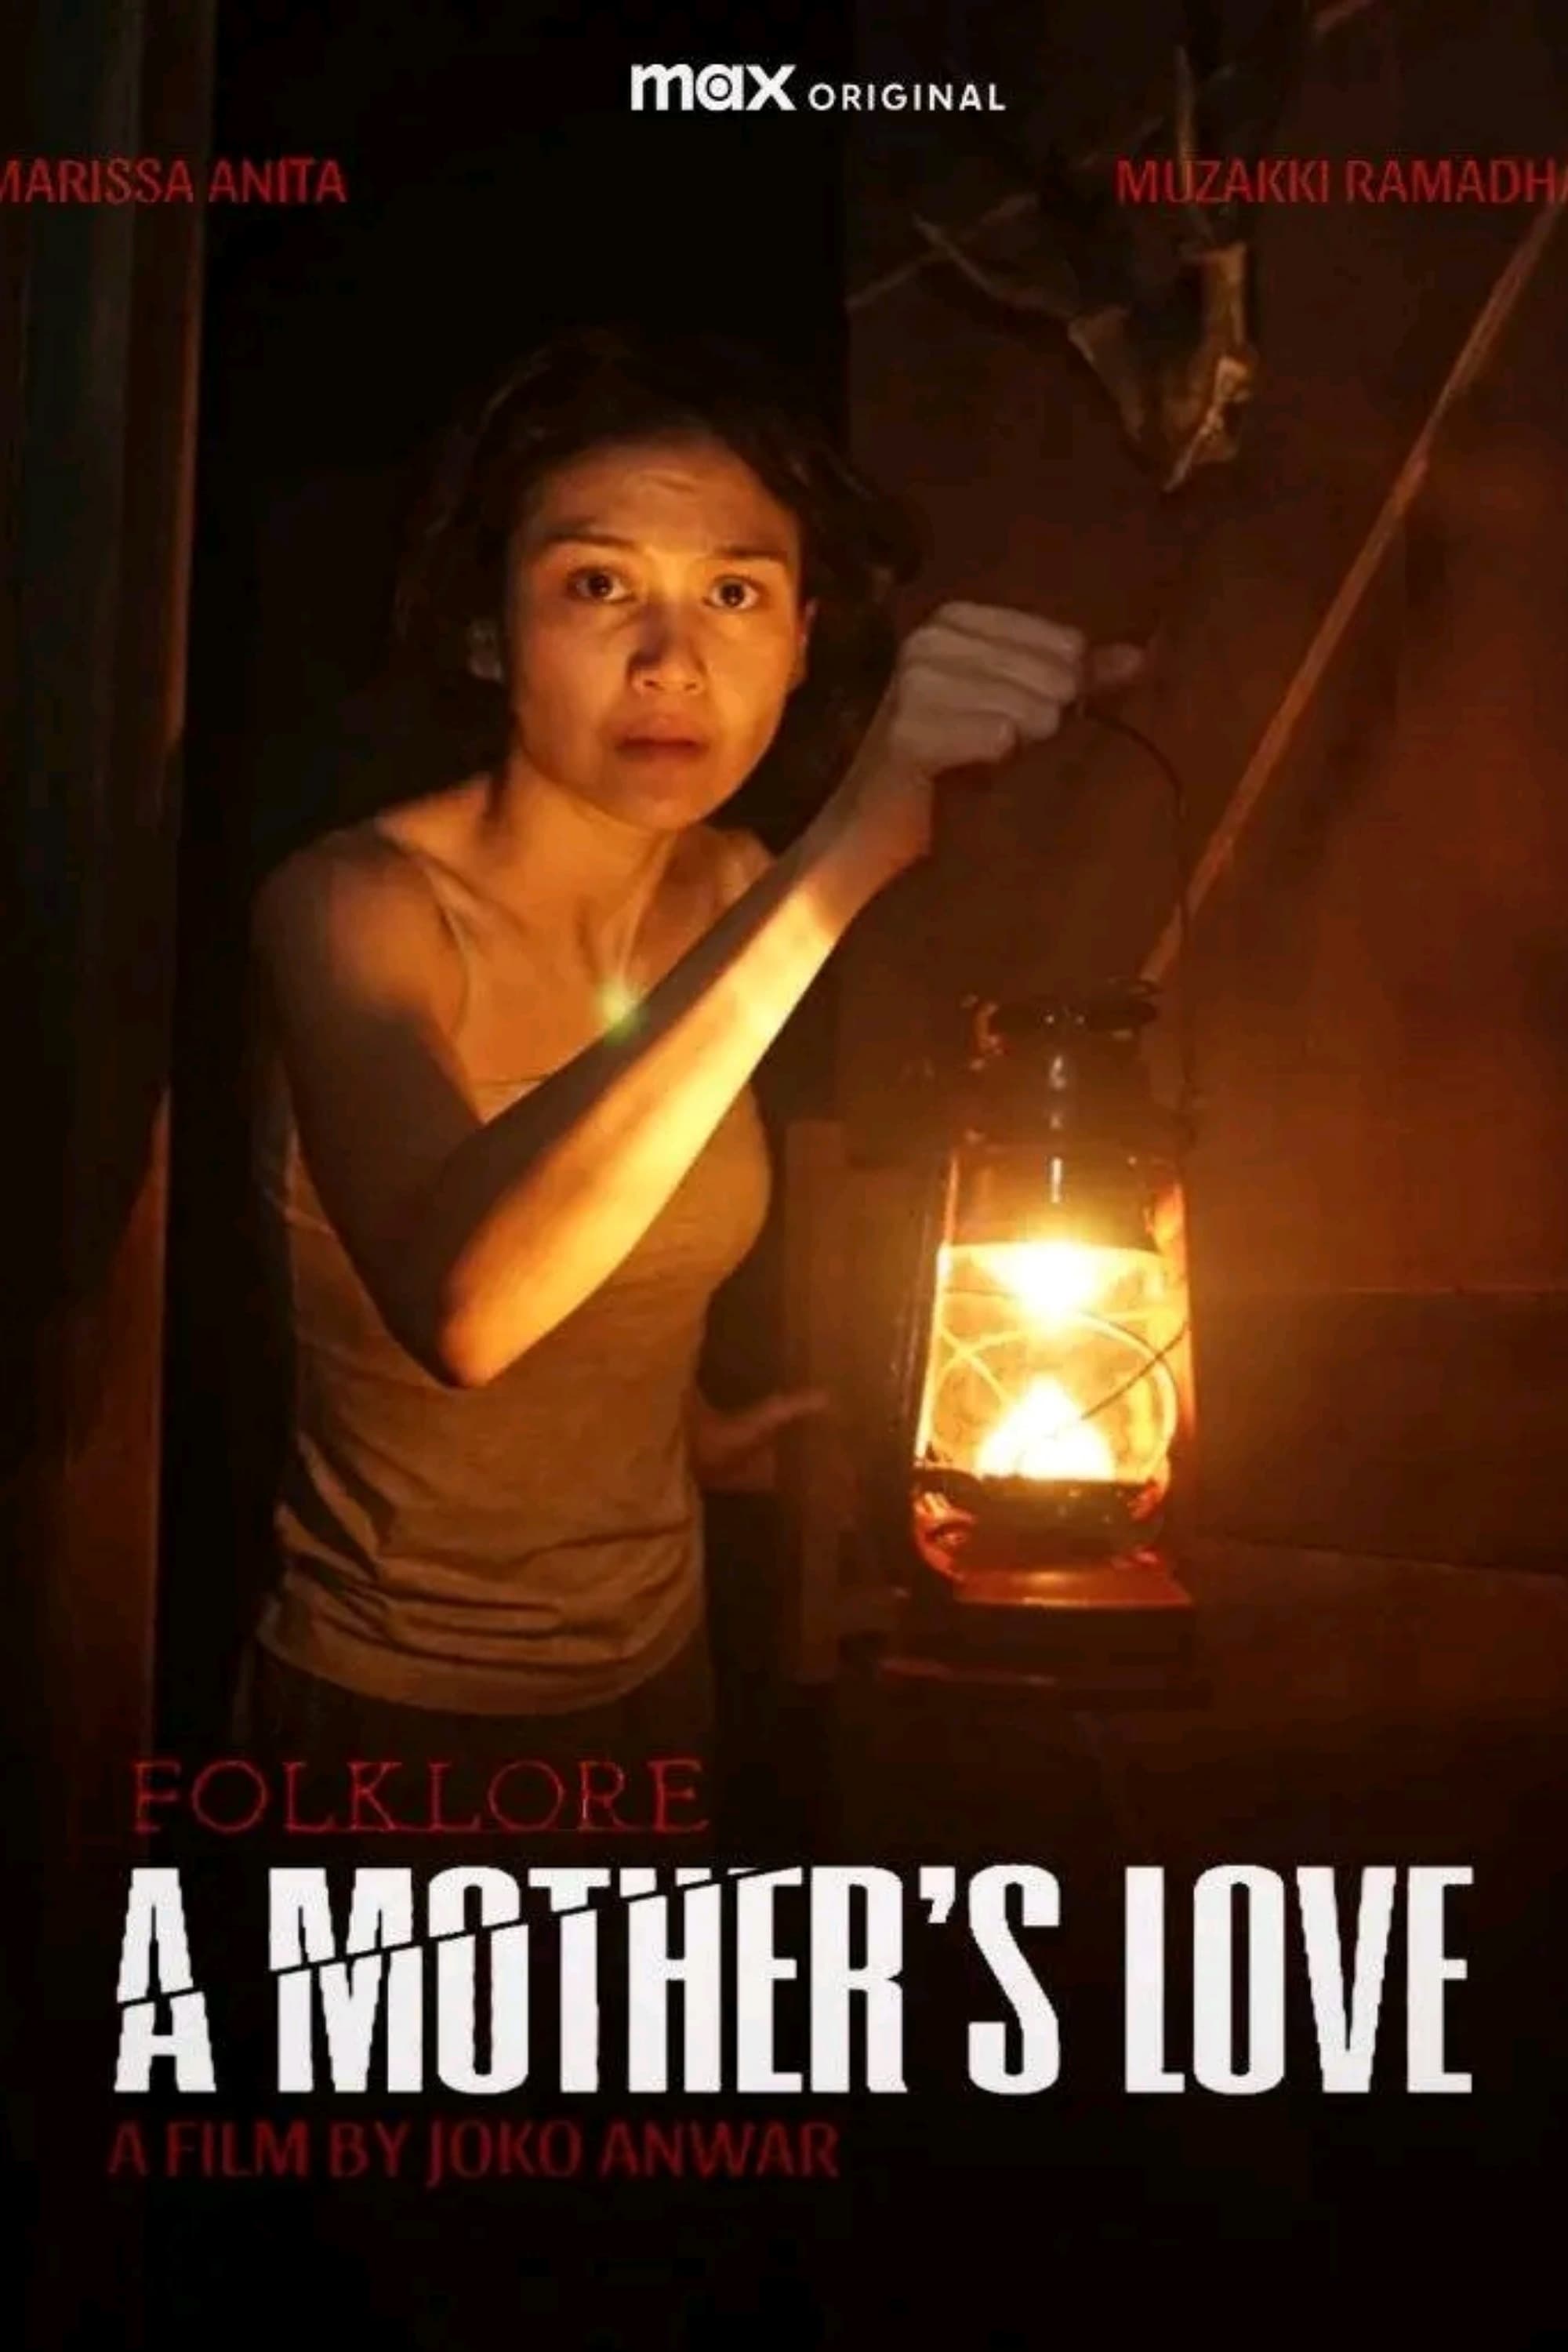 Folklore: A Mother's Love (2018)